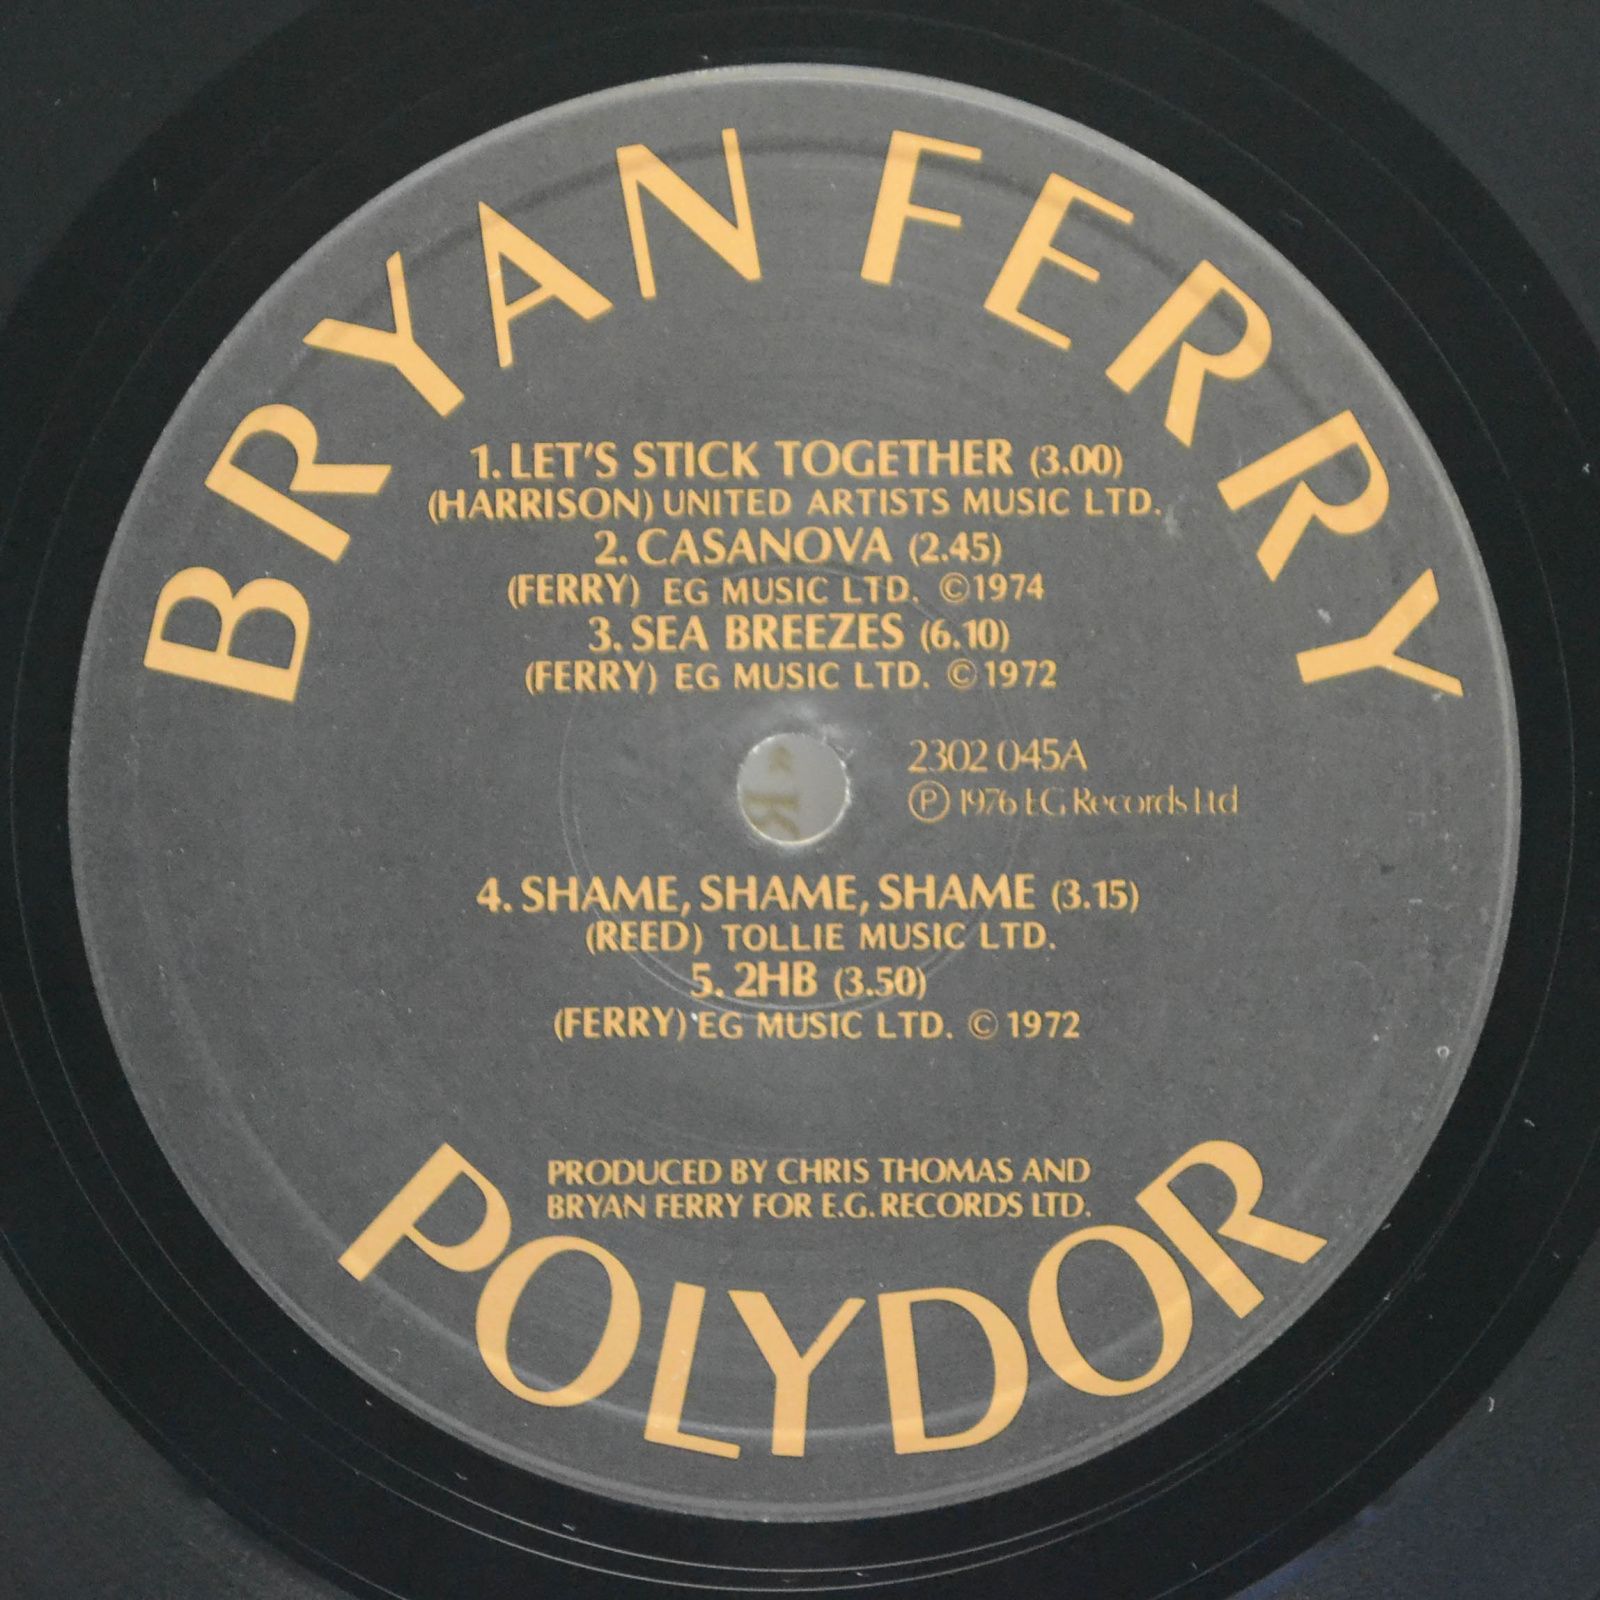 Bryan Ferry — Let's Stick Together (UK), 1974